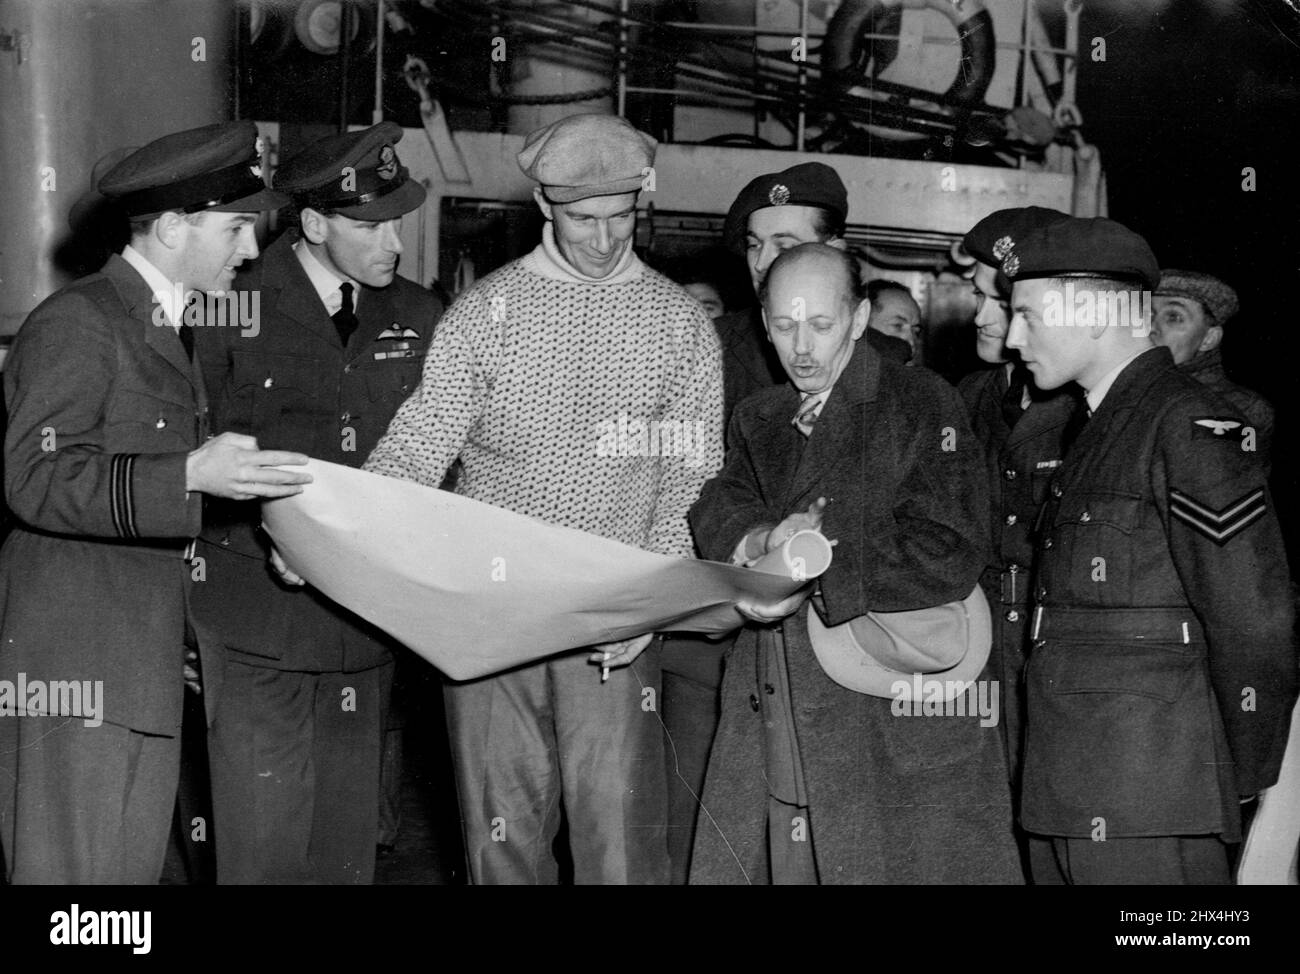 Raf Send Polar 'Pathfinders'. - (For story see companion picture). Studying a chart aboard the Norsel, L. to R. Lt. Tudor; SQ/LDR. Walford; Capt. John Giaever, leader of the expedition; Harald sverdrup, director of the Norwegian Polar institution (he is not a member of the expedition); SGT. Weston and CPL. Quar. November 21, 1949. Stock Photo